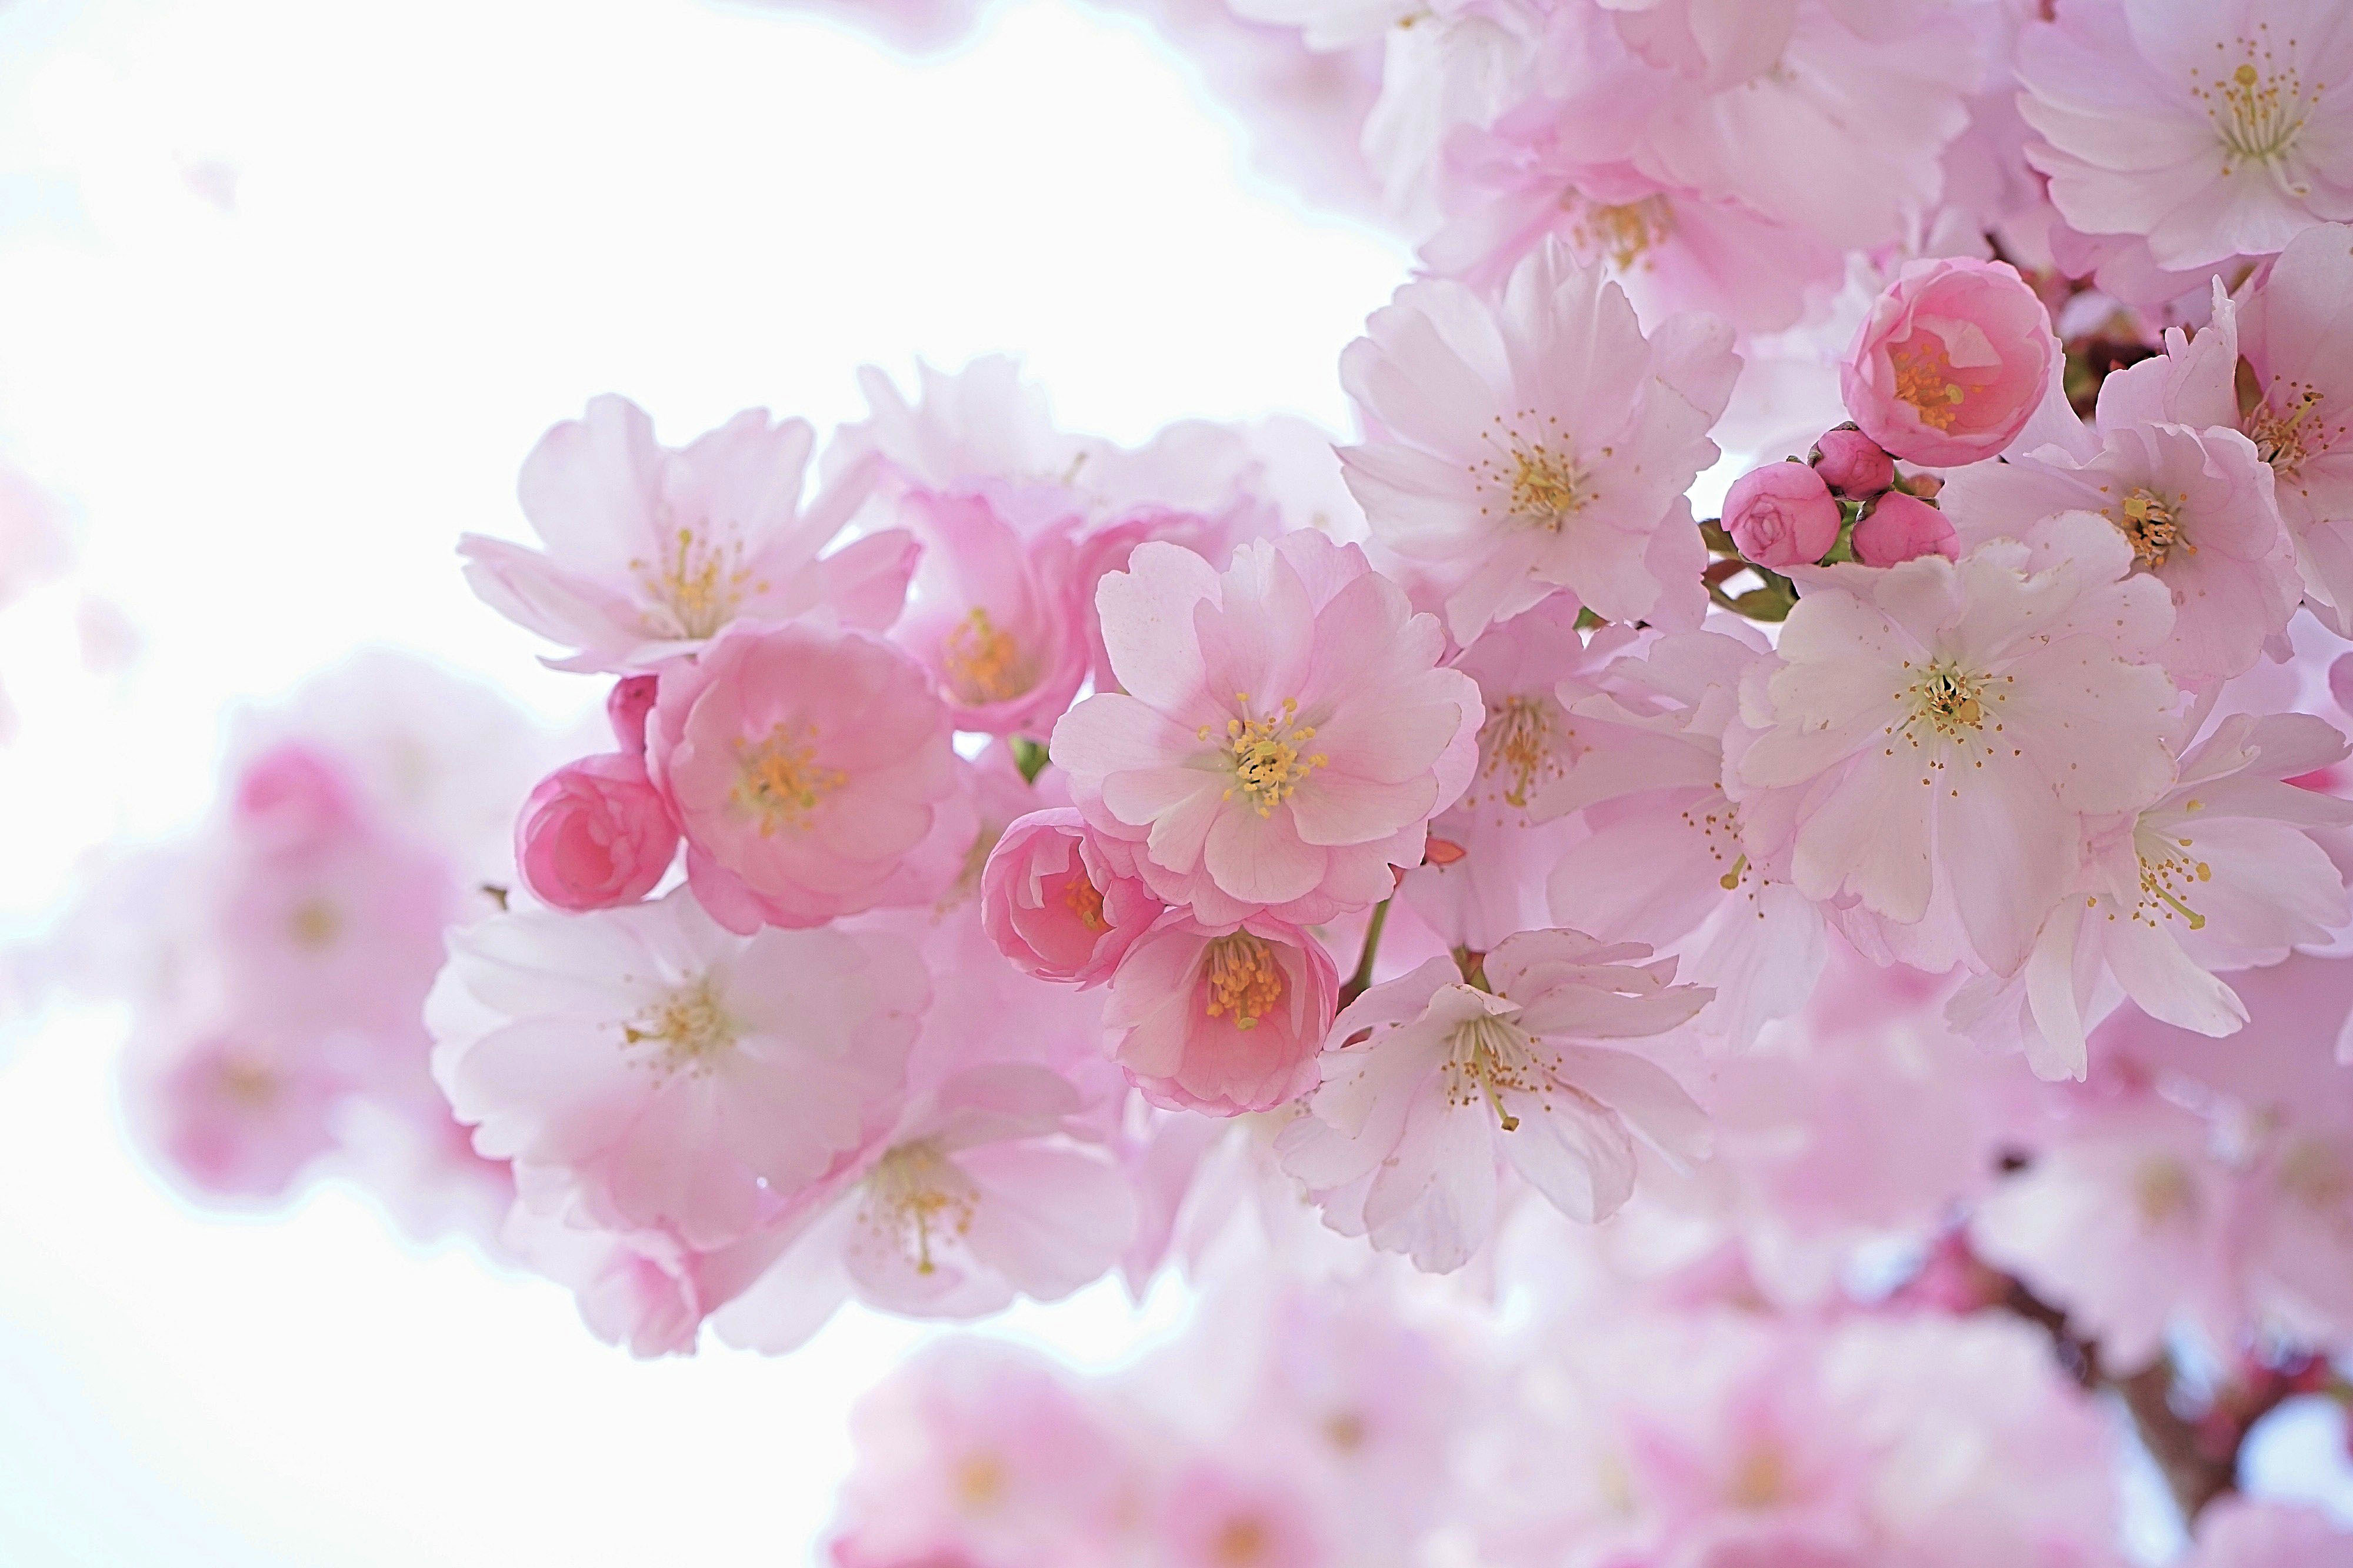 Sakura Flower In Japan Cherry Blossom The Most Famous Species Of